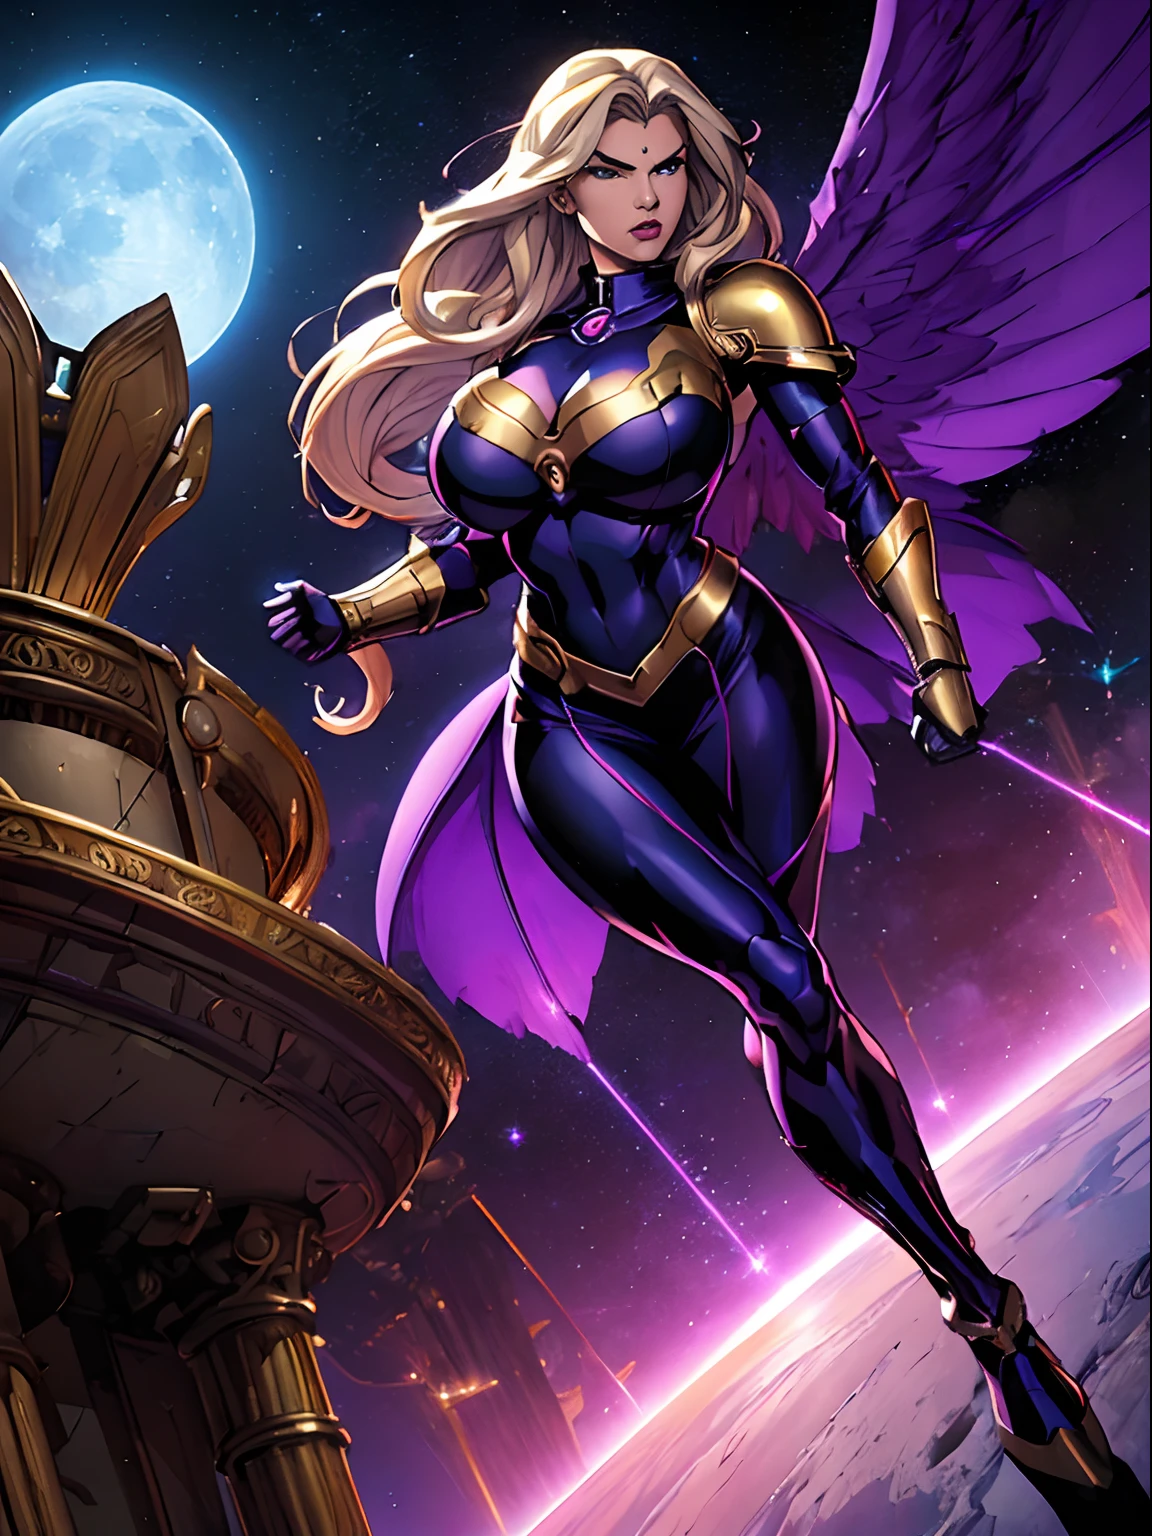 (masterpiece, top quality, best quality, official art, beautiful and aesthetic:1.2), (1girl:1.3), extremely long curly golden hair, extremely detailed, portrait, looking at viewer, solo, (full body:0.6), detailed background, close up, (cool science fiction space theme:1.1), extremely busty valkyrie, charlatan, mysterious, shooting lasers in space, cybernetic angel, huge feathered wings, chrome boob armor, dark purple streamers and skirts and sleeves and knee wrappings, cybernetic implants, mechanical hand, laser cannon, arm cannon, revealing chrome armor, bare midriff, glowing laser energy, halo, intricate armor, ornate chrome armor, sheer white fabric, elegant purple fabric, skirts, streamers, cowl, boots, bracers, ((((gigantic breasts))), slim waist, slim hips, long legs, athletic, SPACE, futuristic moon, (space exterior:1.1) background, dark mysterious lighting, shadows, magical atmosphere, dutch angle